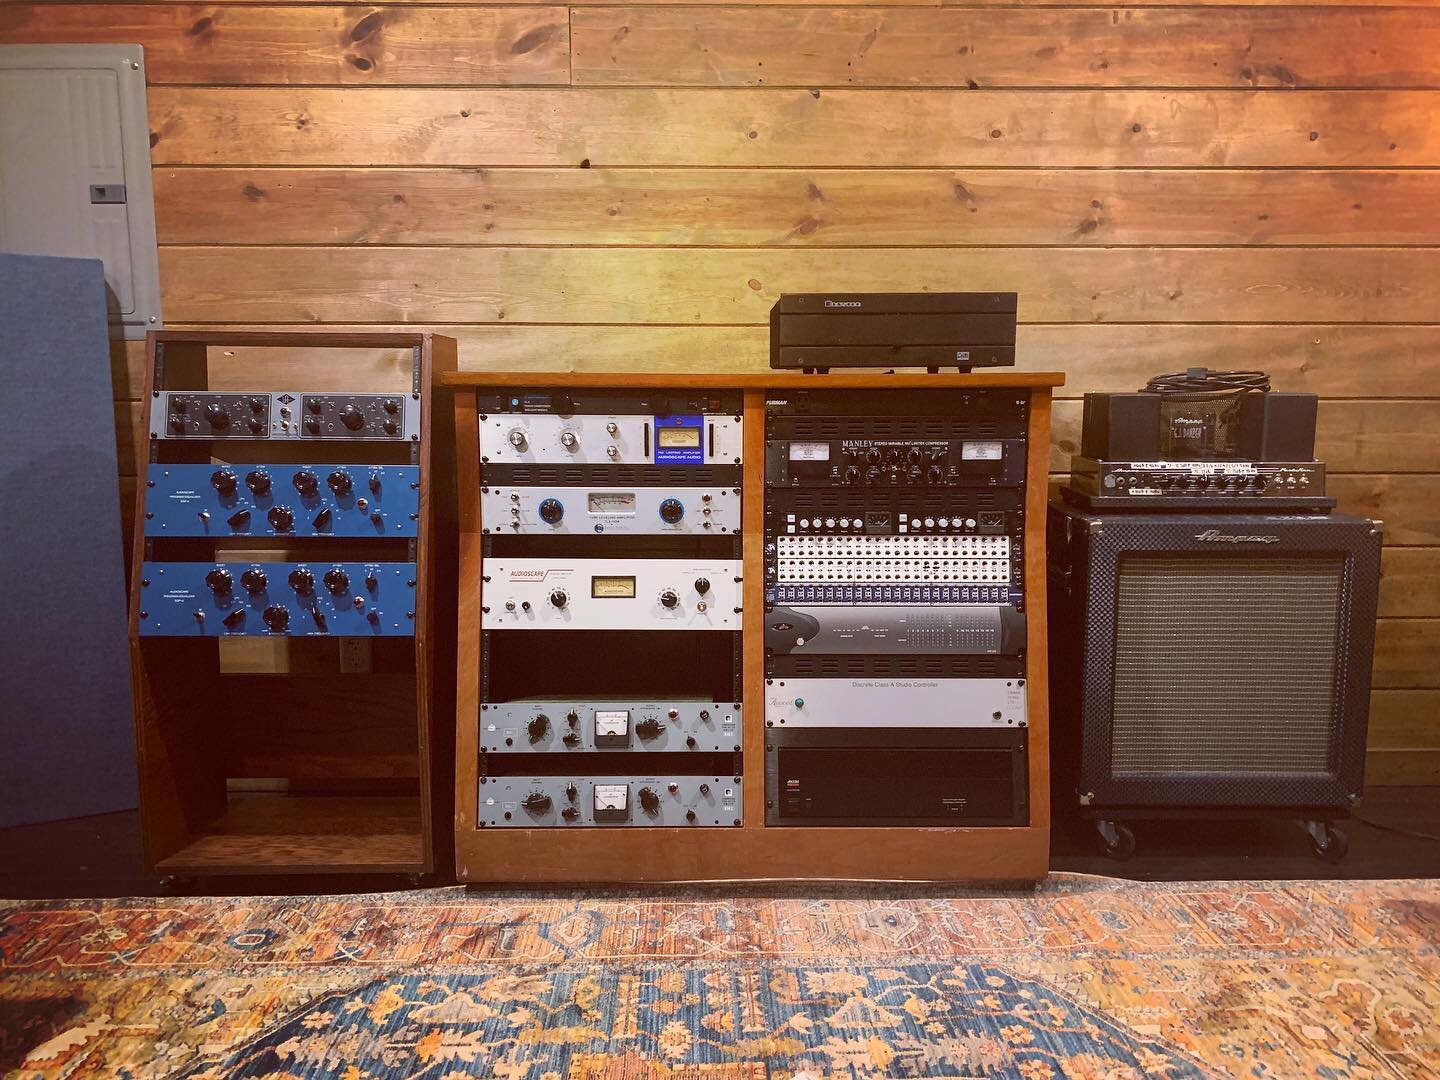 As my father-in-law would say, these racks and the studio are coming together &ldquo;slowly but slowly.&rdquo; I&rsquo;m feeling good about this layout so far. Next up, mapping out the patch-bay in a Google Sheet. #recordingstudio #outboardgear #musi